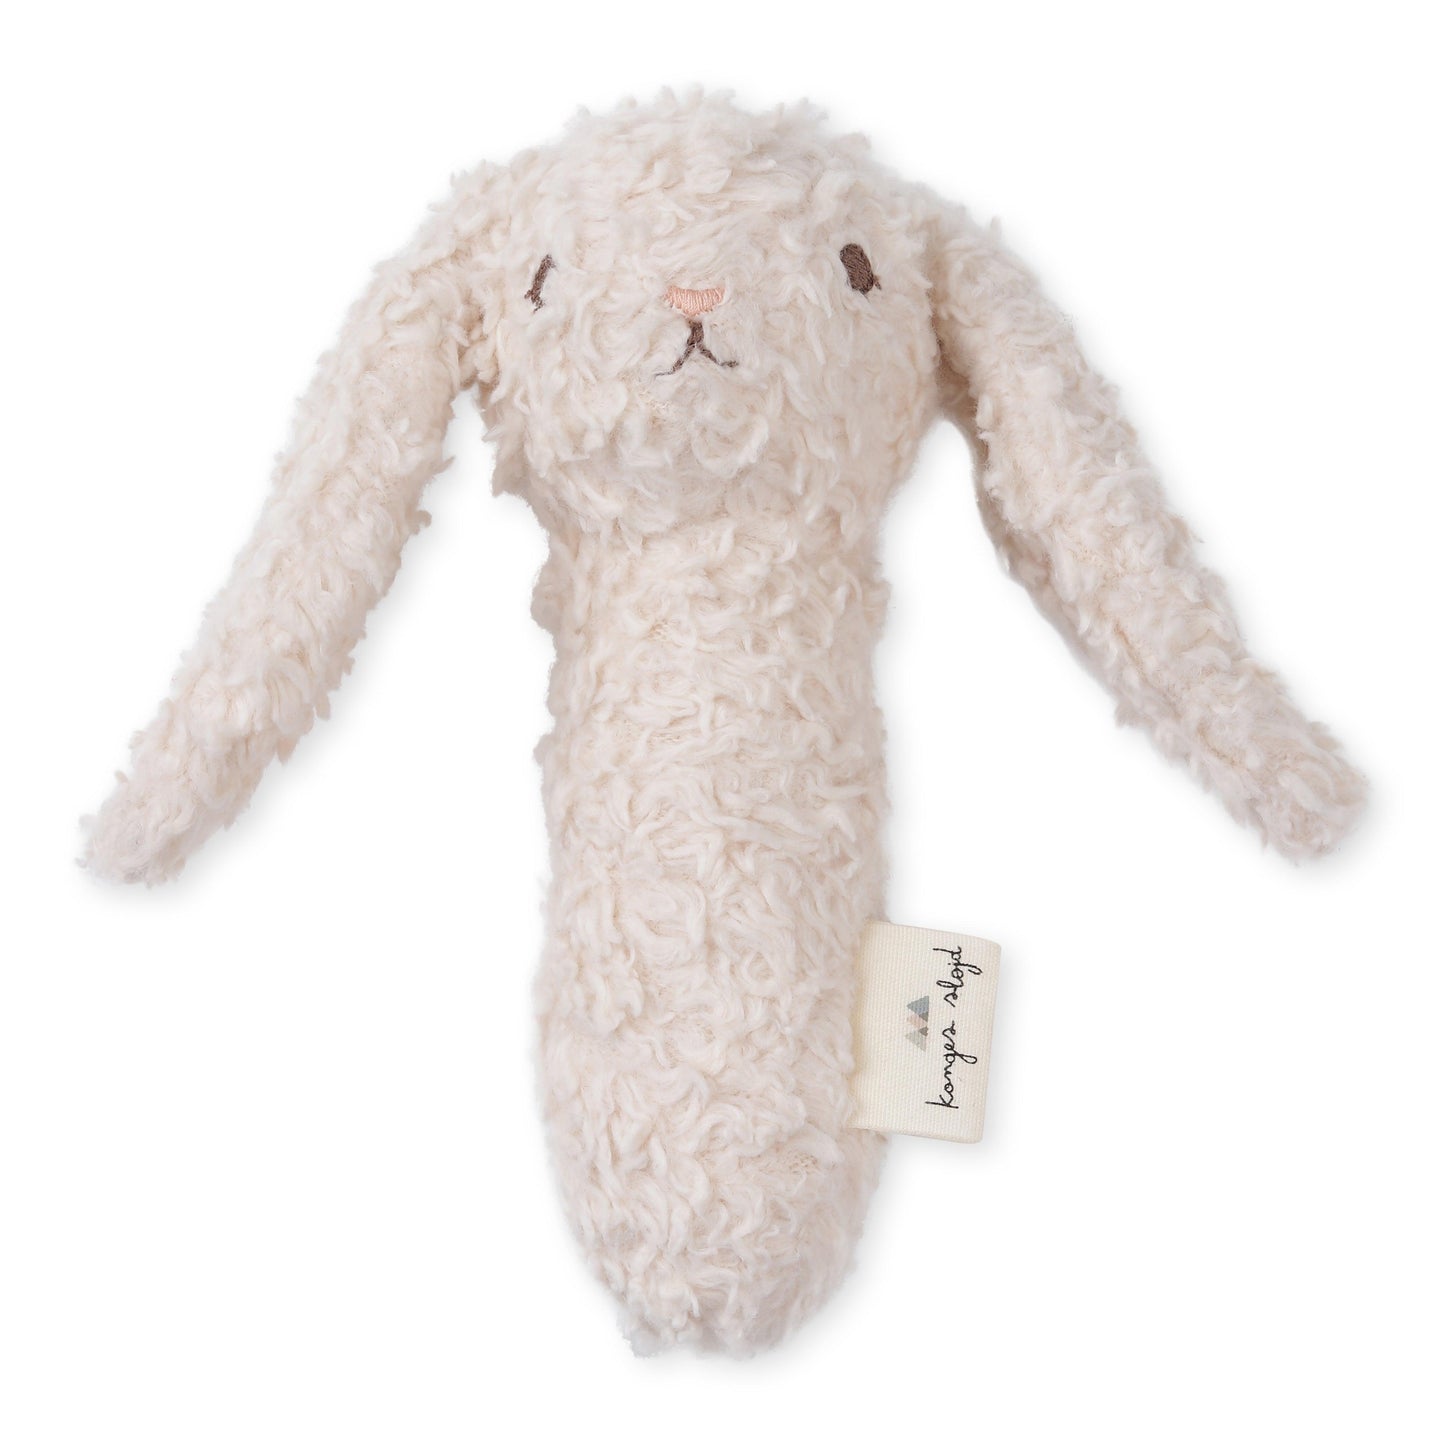 Rassel 'Bunny' - The Little One • Family.Concept.Store. 